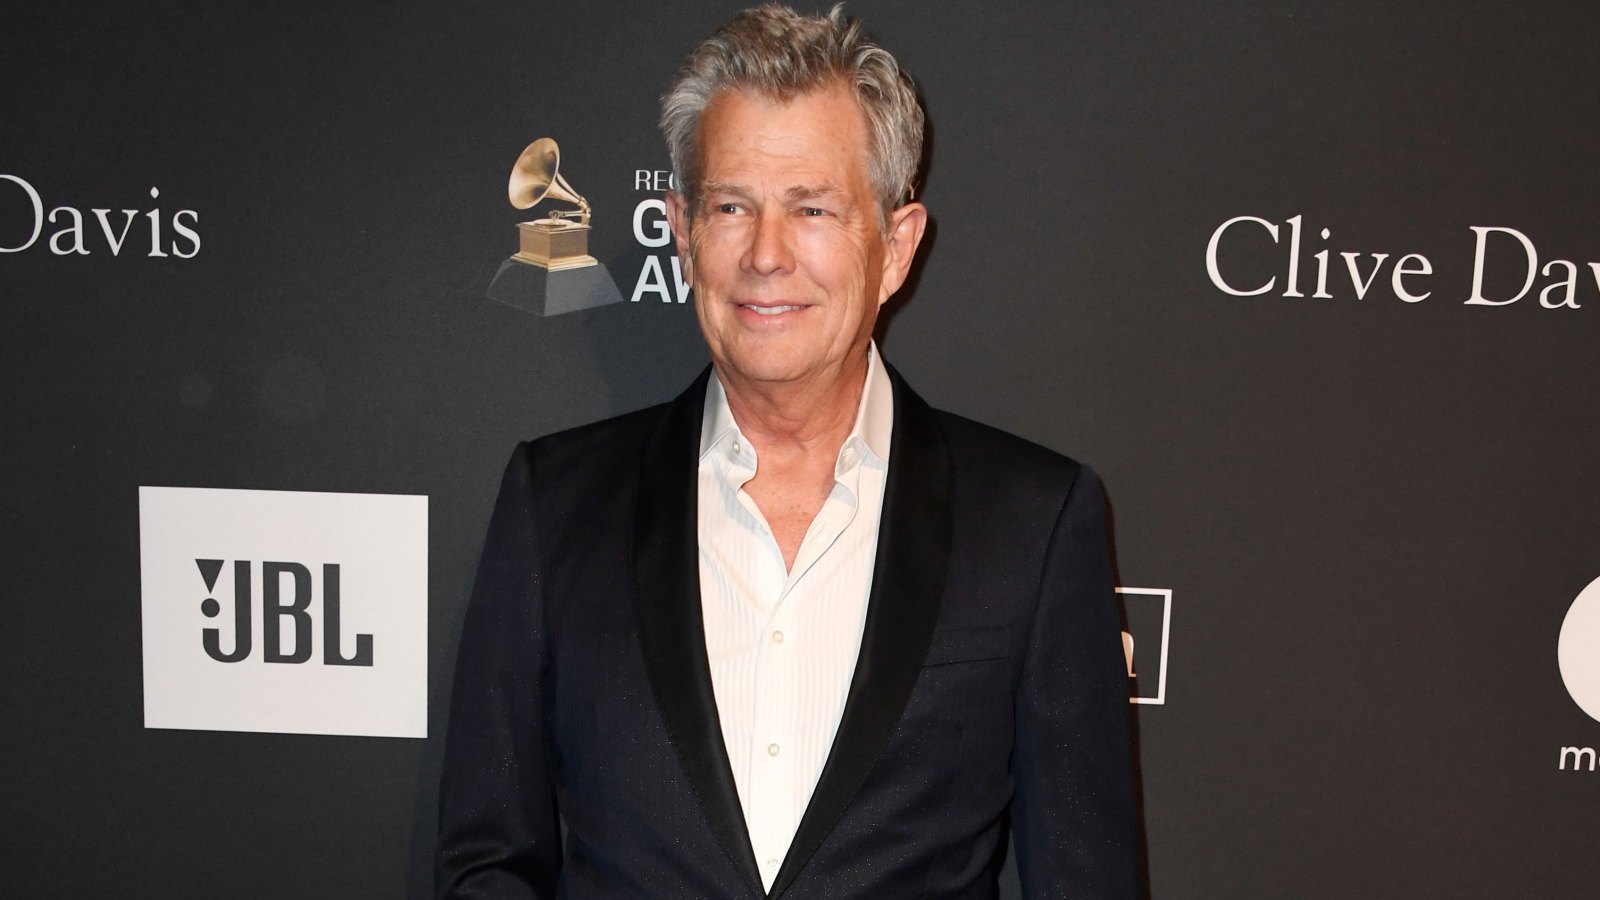 David Foster Pokes Fun at College Admissions Scam: 'I'd Be in Jail'